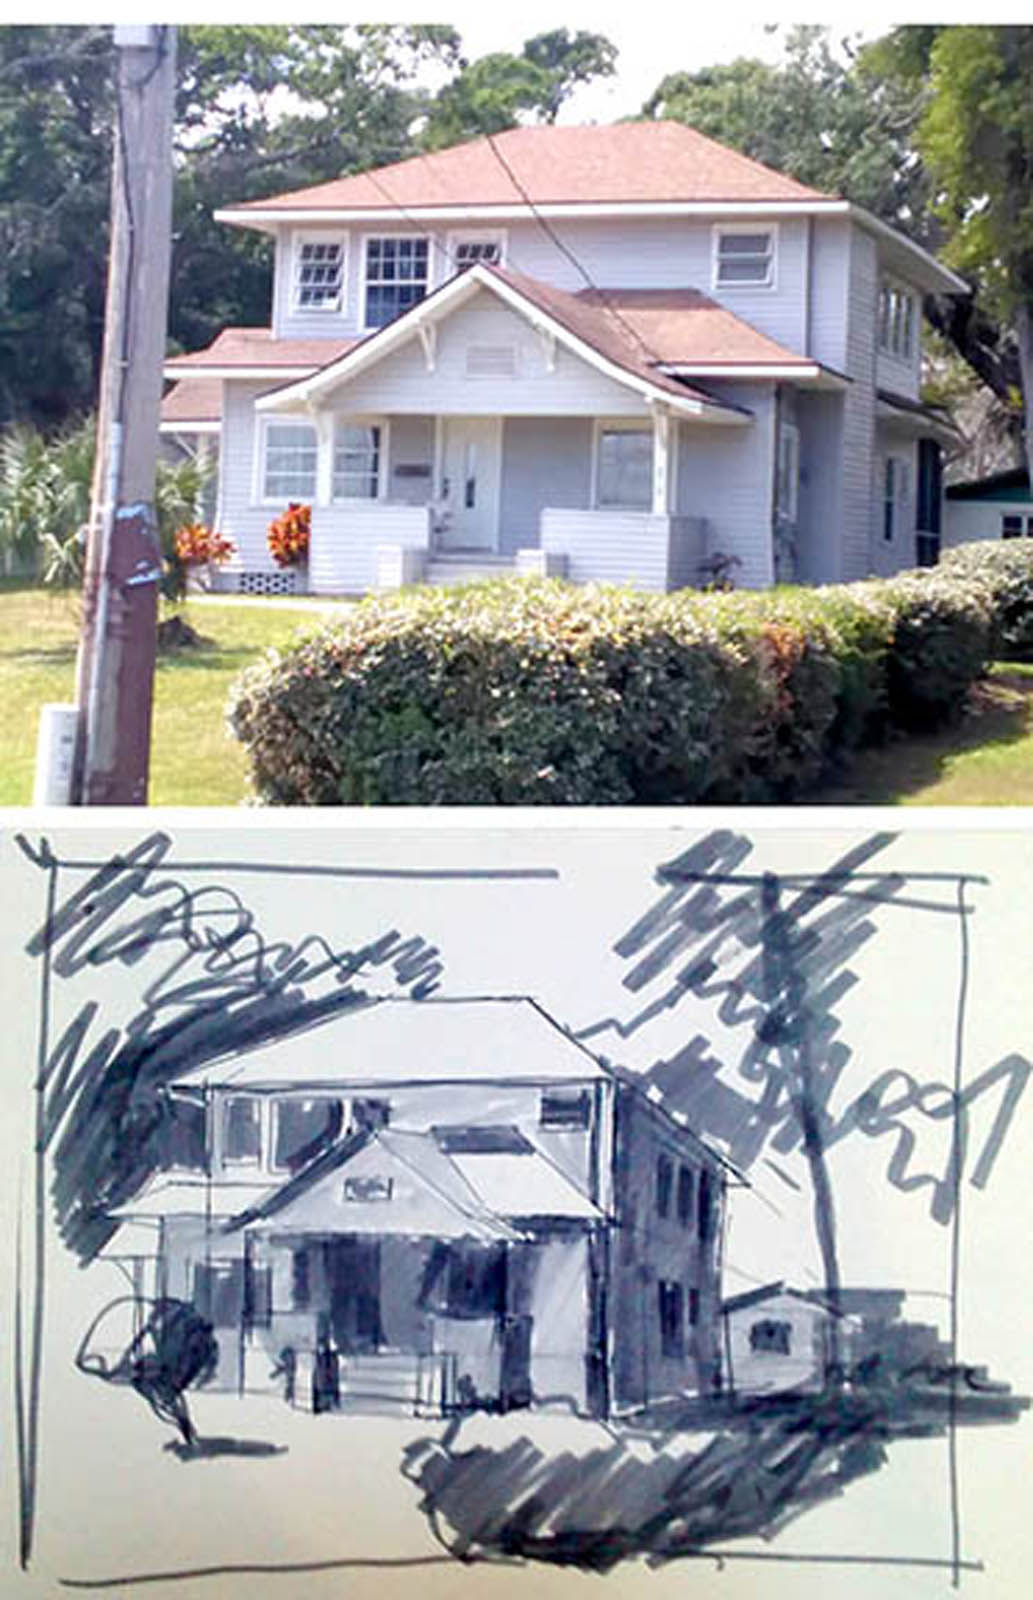 House with value sketch